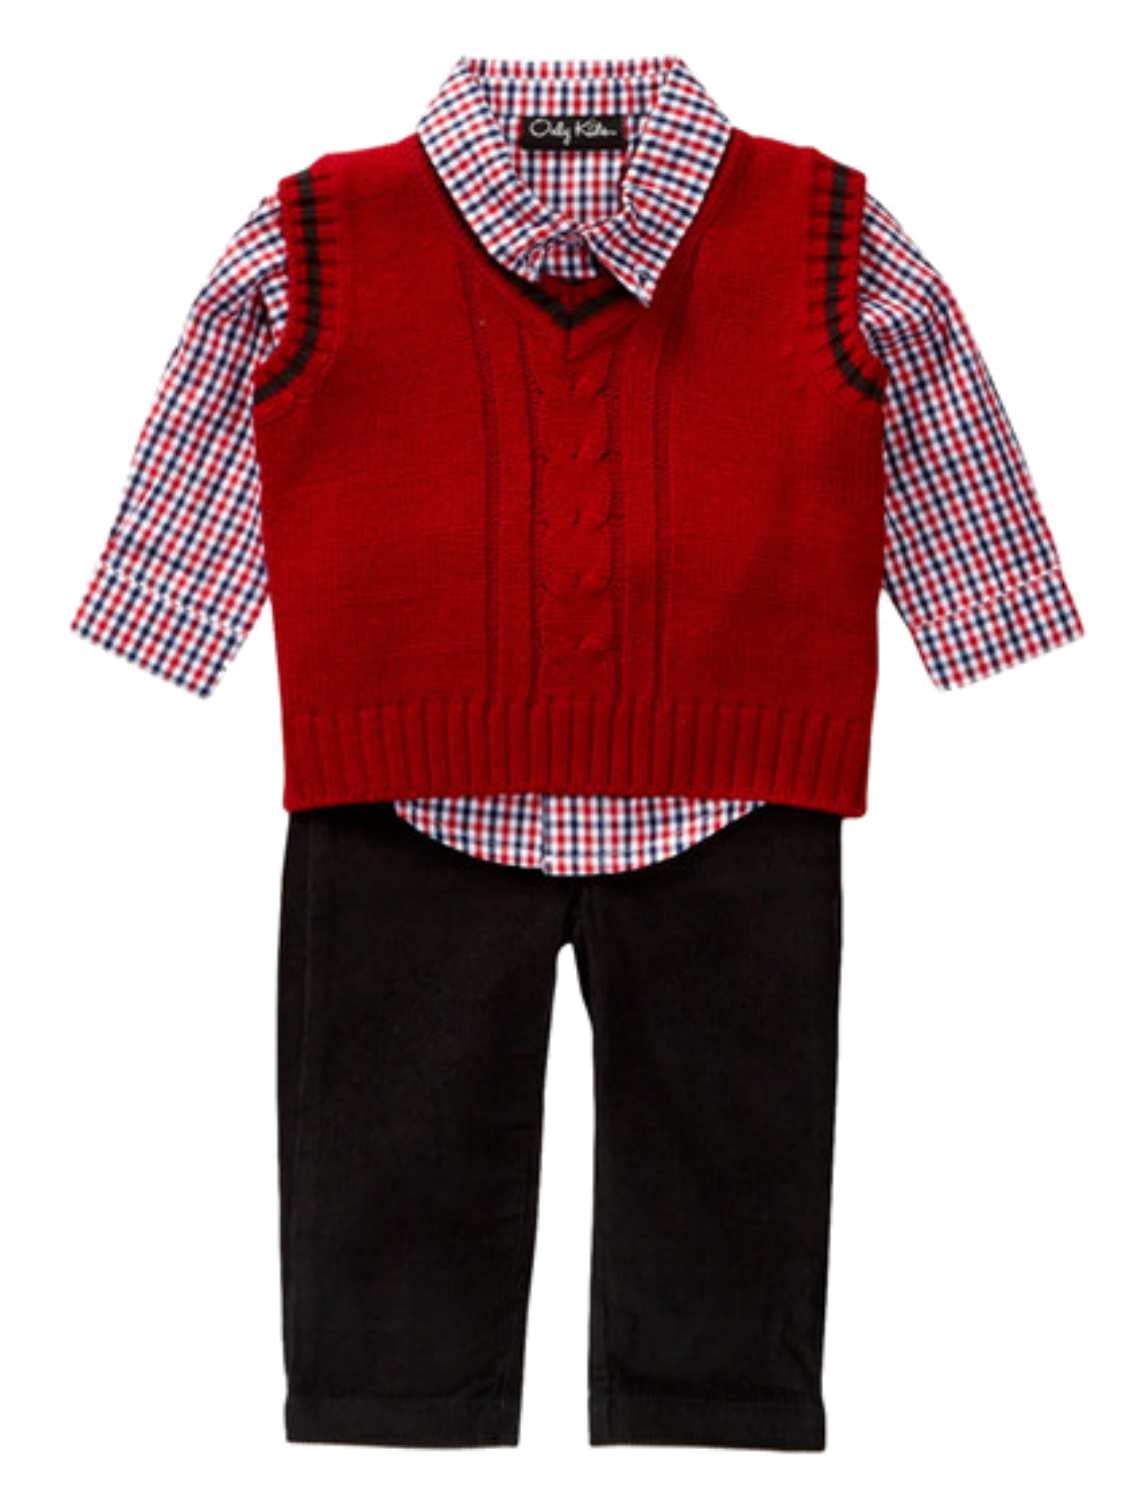 dress up outfits for baby boy